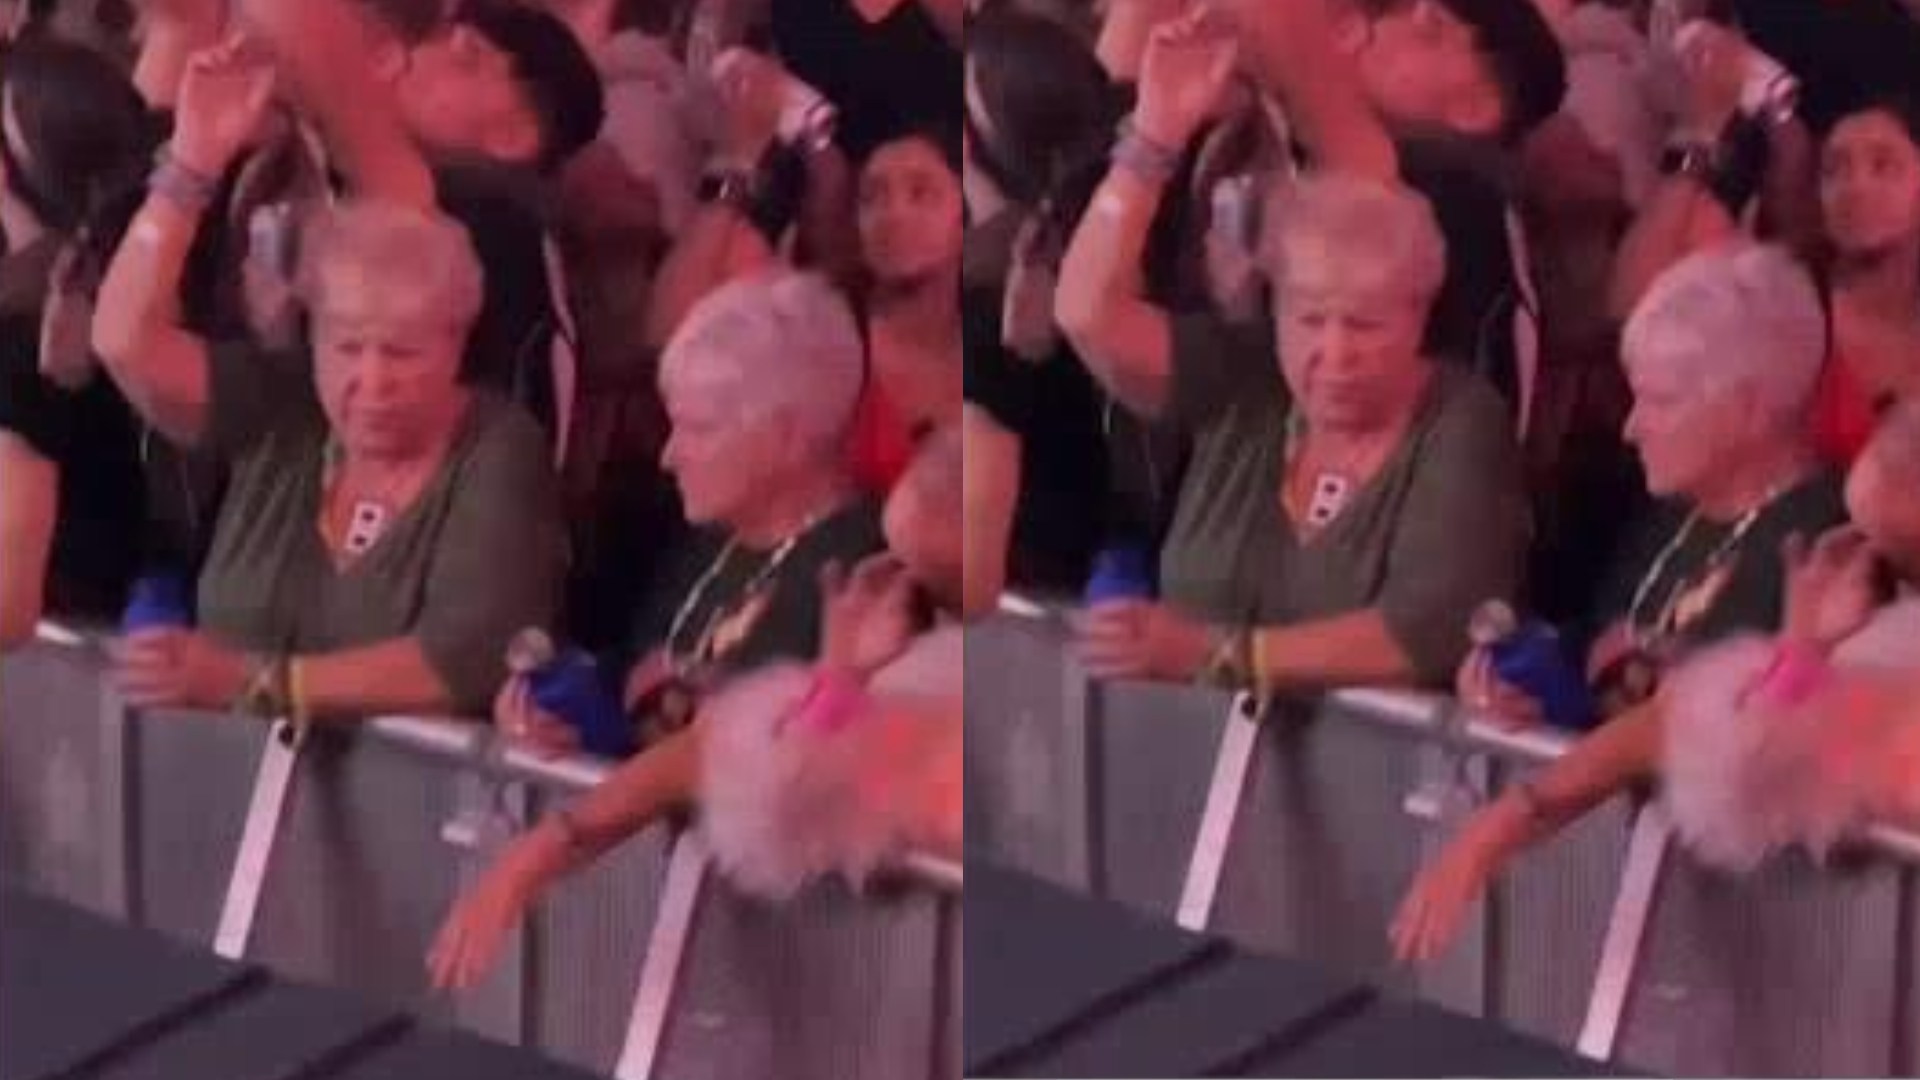 Two elderly women go to a David Guetta concert... and go viral